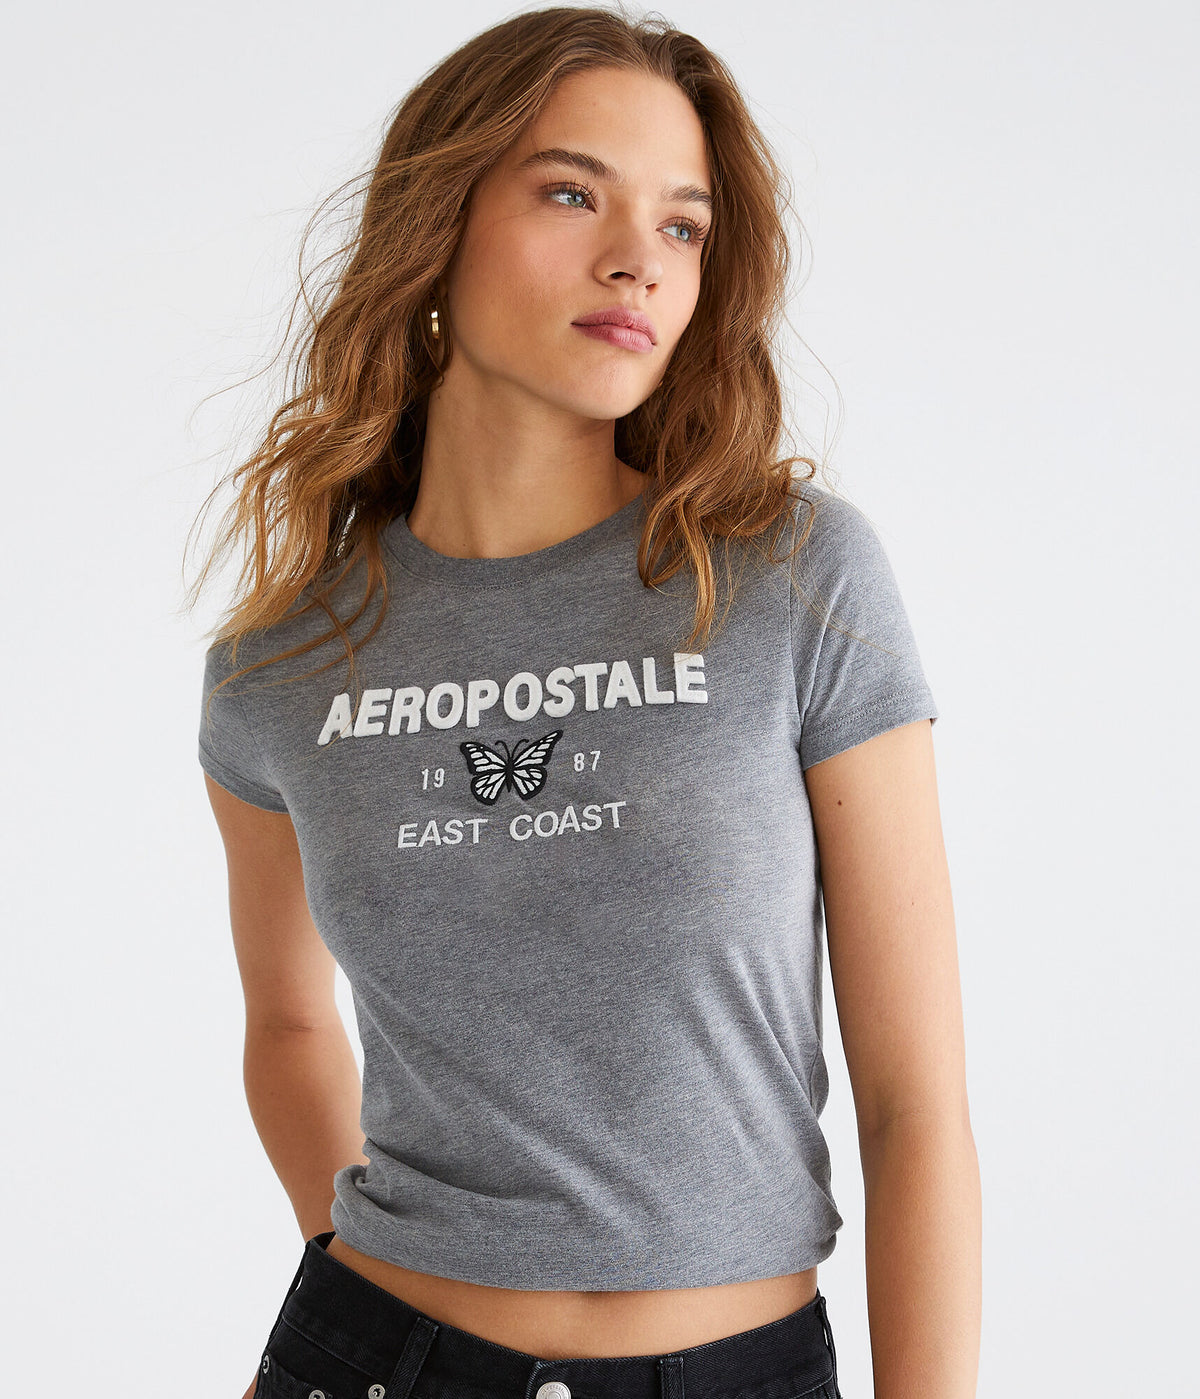 Aeropostale Womens' Aeropostale Butterfly Applique Graphic Tee - Grey - Size XL - Cotton - Teen Fashion & Clothing Med Hthr Grey